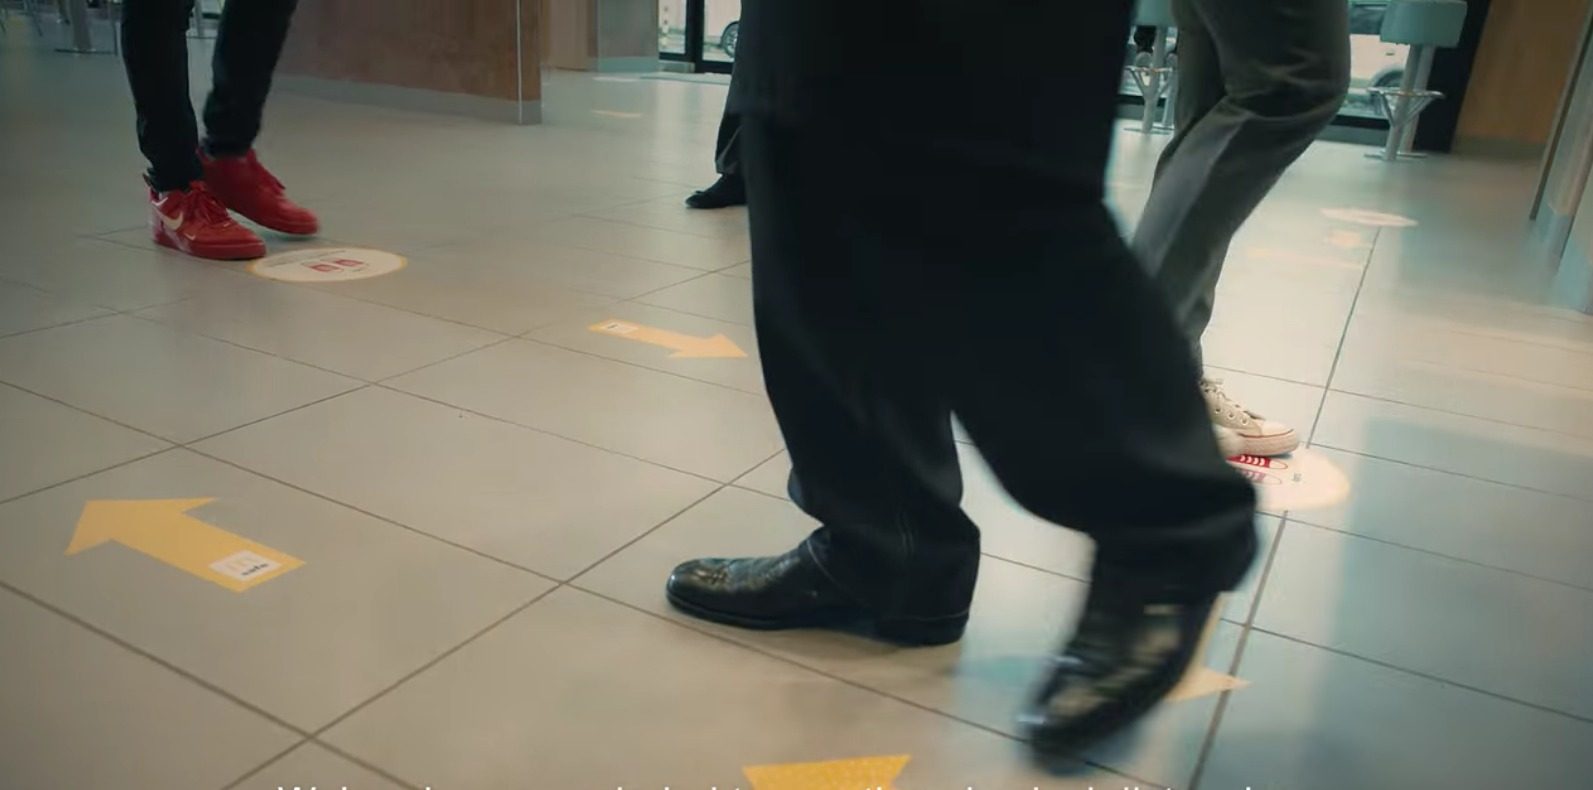 GUIDE. McDonald's stores have stickers on the floors for queuing and walking. Screenshot from McDonald's video 